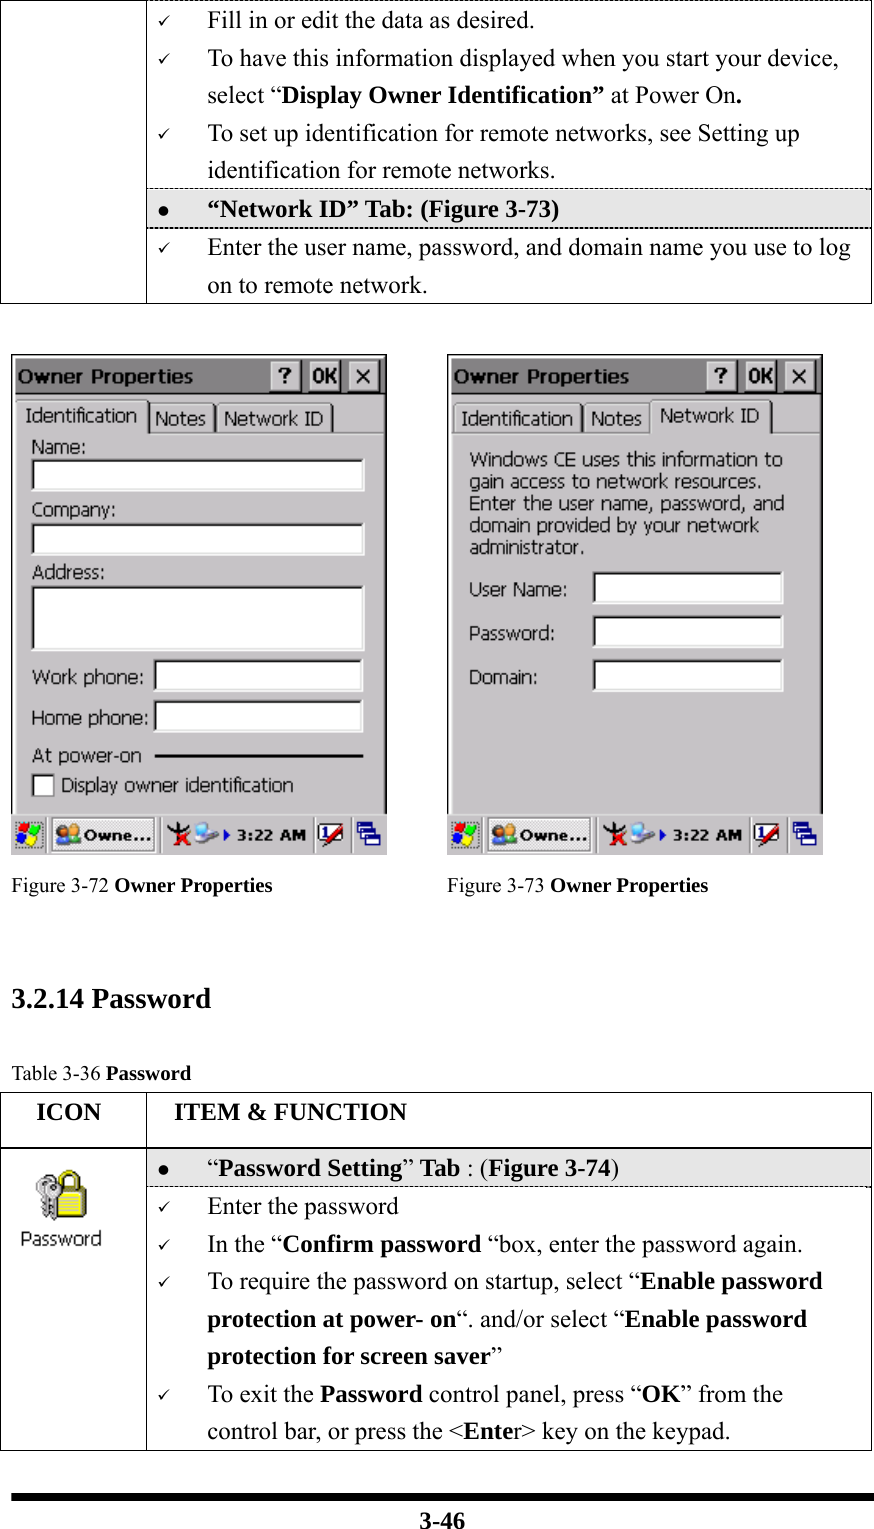  3-46 9 Fill in or edit the data as desired. 9 To have this information displayed when you start your device, select “Display Owner Identification” at Power On. 9 To set up identification for remote networks, see Setting up identification for remote networks. z “Network ID” Tab: (Figure 3-73) 9 Enter the user name, password, and domain name you use to log on to remote network.     Figure 3-72 Owner Properties  Figure 3-73 Owner Properties   3.2.14 Password   Table 3-36 Password   ICON   ITEM &amp; FUNCTION z “Password Setting” Tab : (Figure 3-74)  9 Enter the password 9 In the “Confirm password “box, enter the password again. 9 To require the password on startup, select “Enable password protection at power- on“. and/or select “Enable password protection for screen saver” 9 To exit the Password control panel, press “OK” from the control bar, or press the &lt;Enter&gt; key on the keypad. 